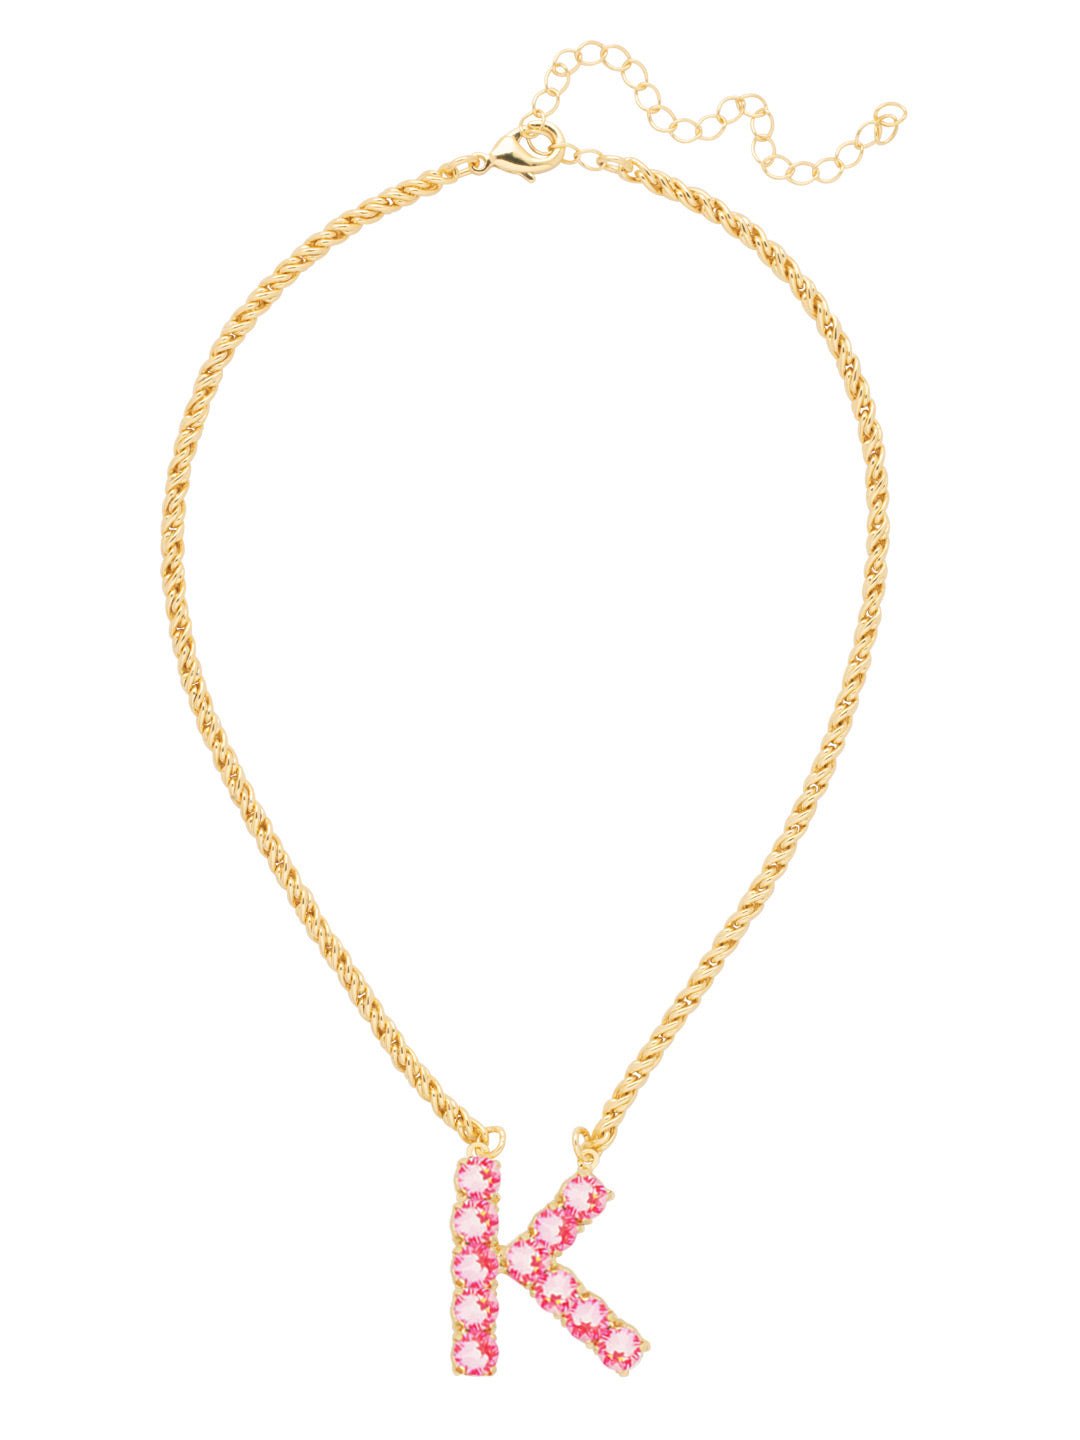 K Initial Rope Pendant Necklace - NFK30BGETP - <p>The Initial Rope Pendant Necklace features a crystal encrusted metal monogram pendant on an adjustable rope chain, secured with a lobster claw clasp. From Sorrelli's Electric Pink collection in our Bright Gold-tone finish.</p>